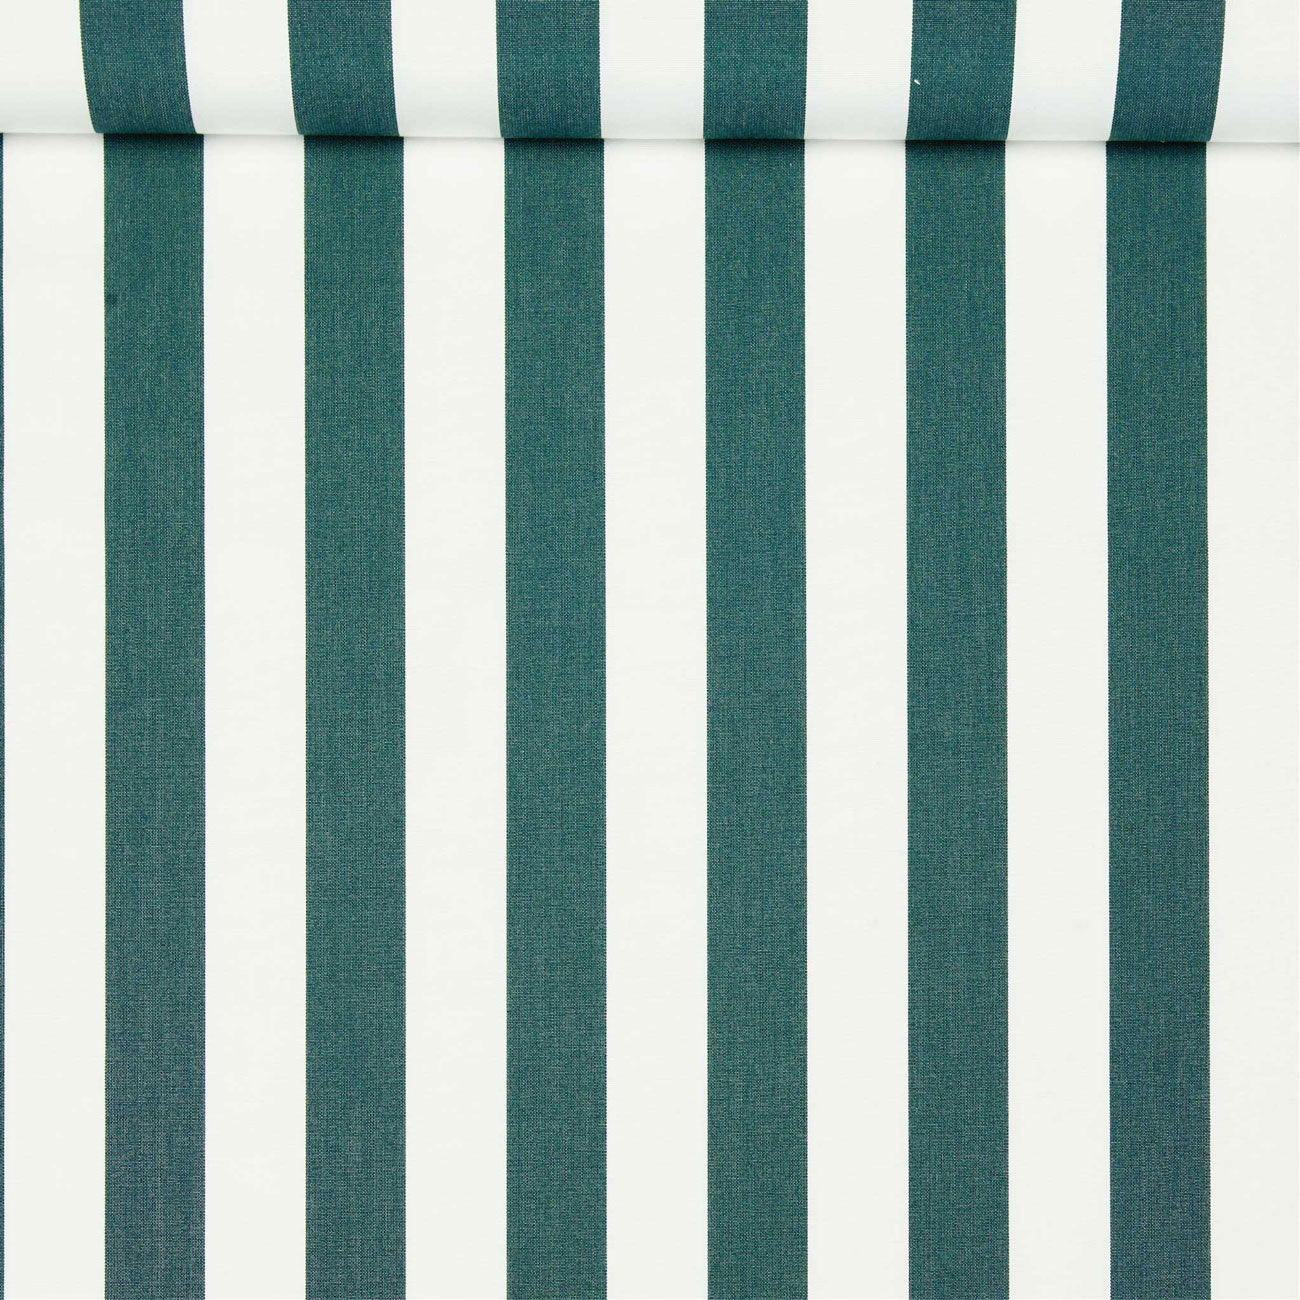 A birds eye view of a green and white striped performance fabric for a beach float for adults.